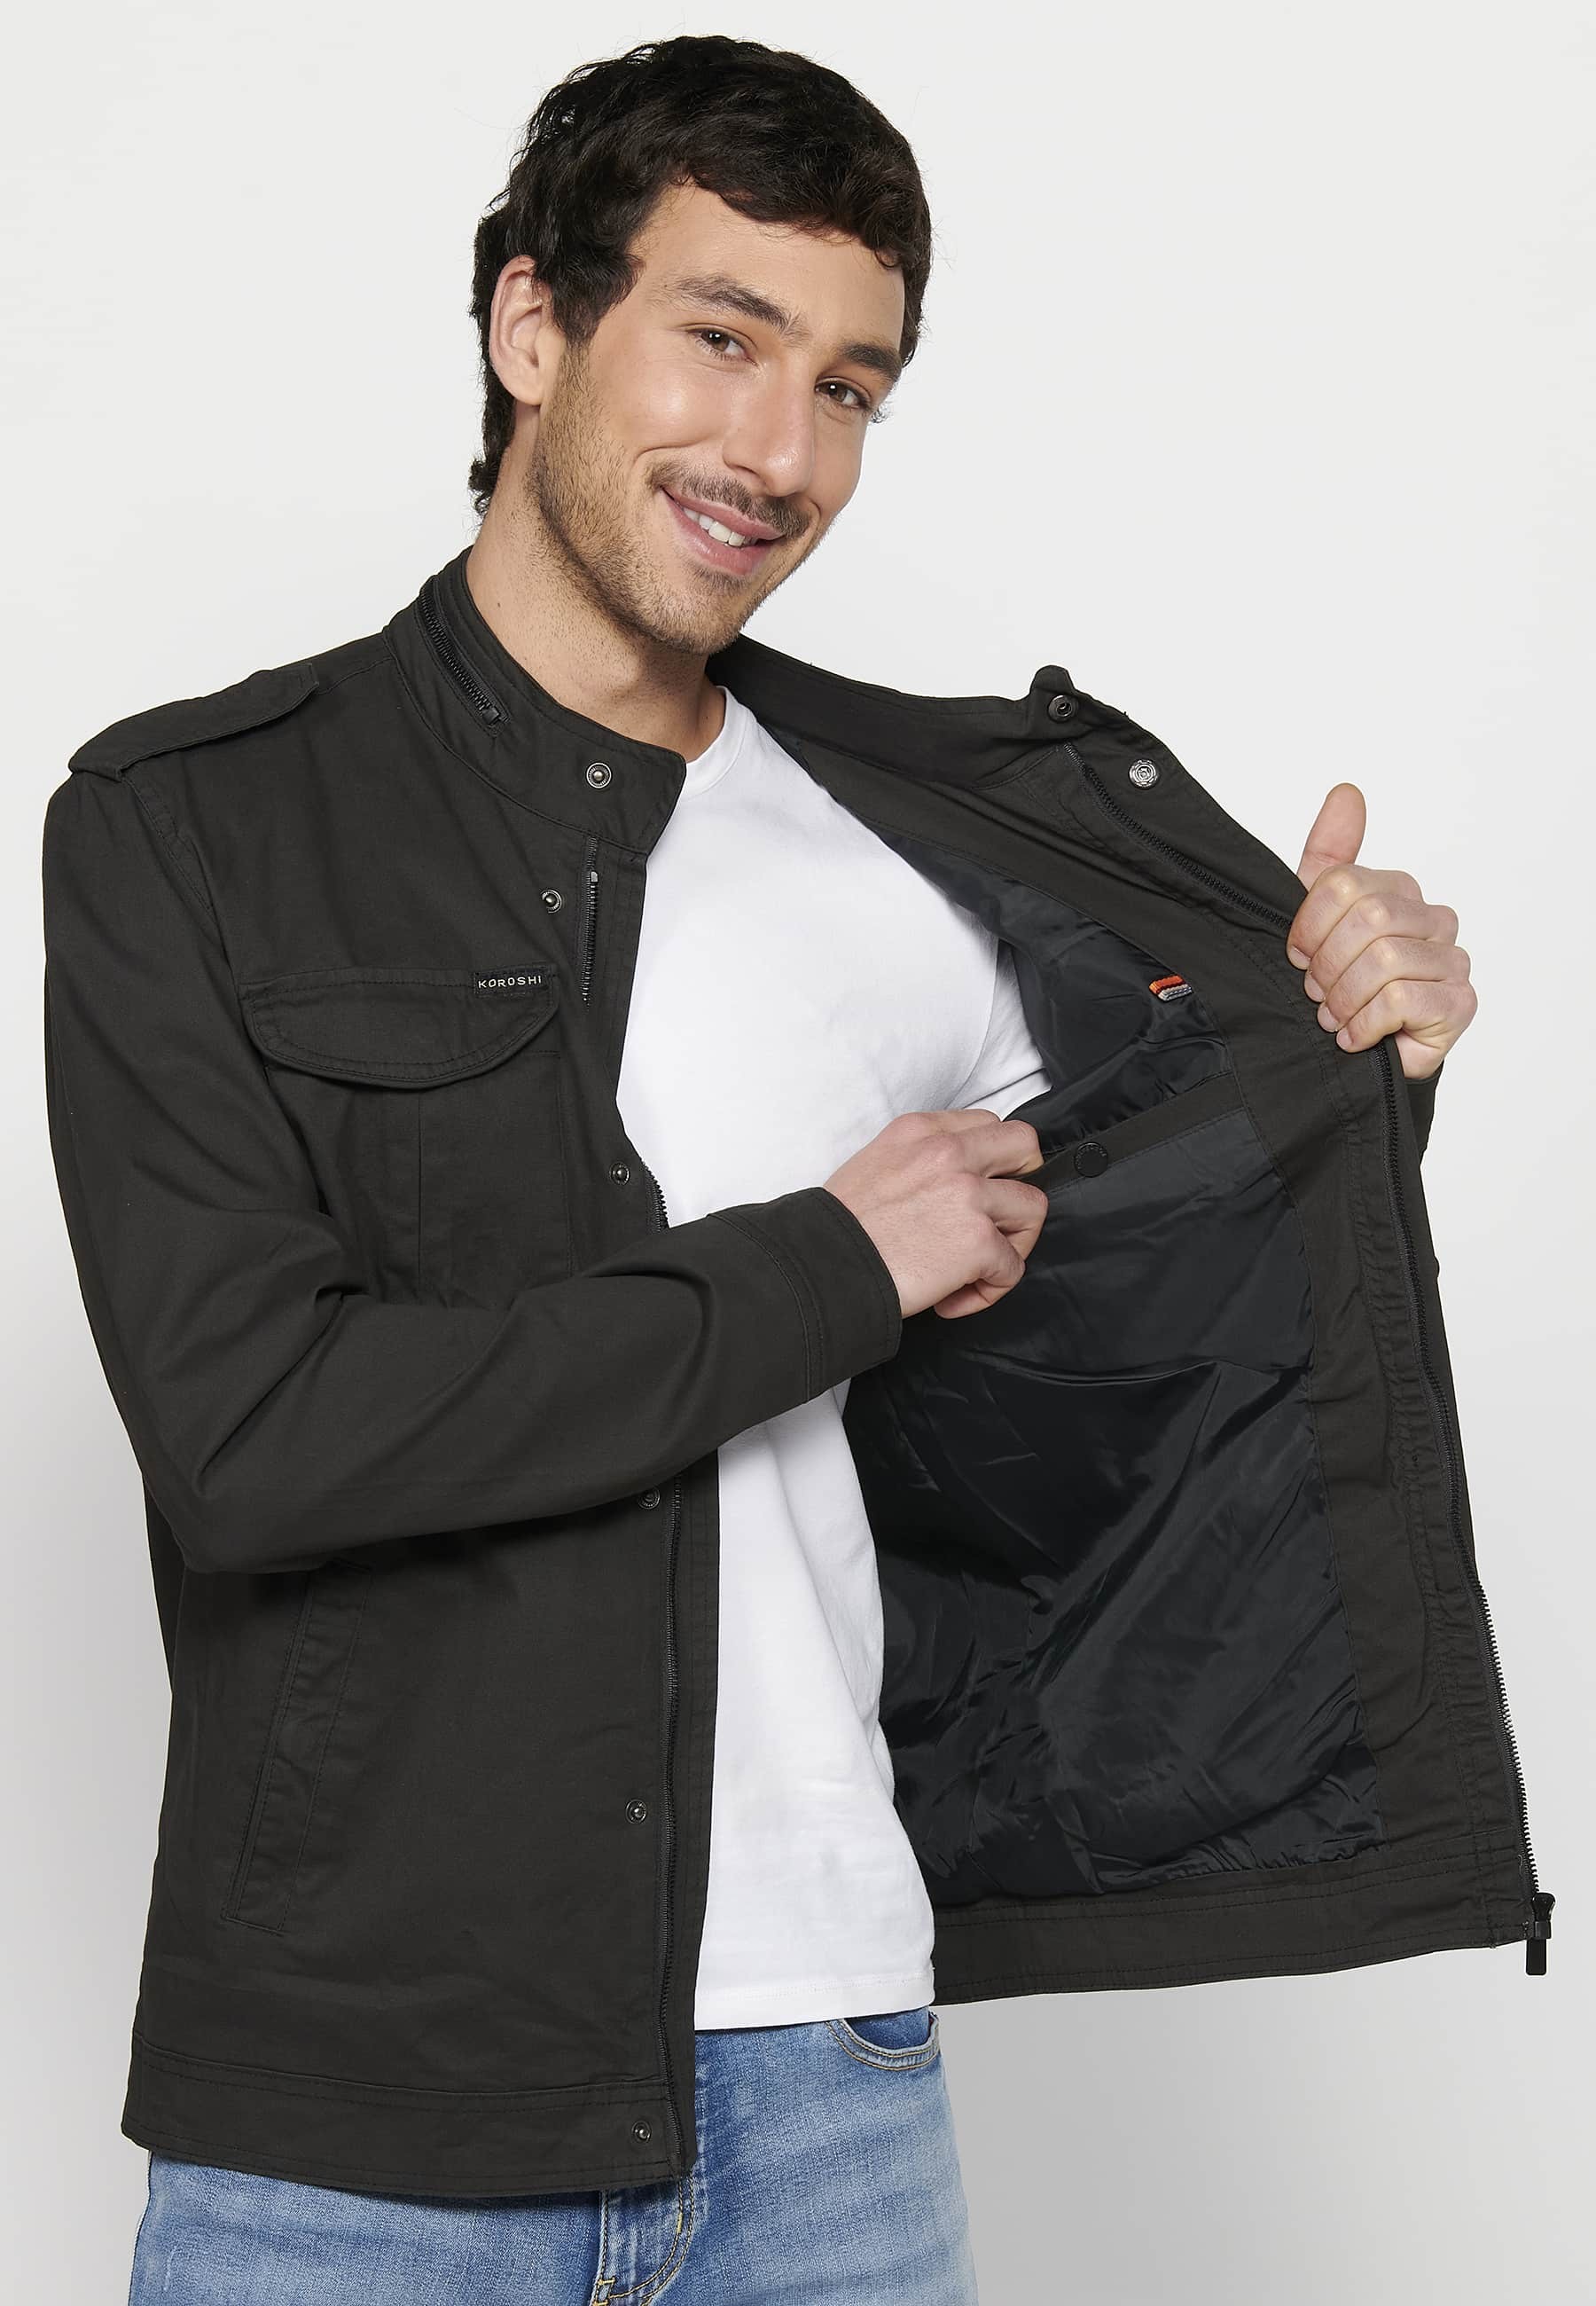 Long-sleeved jacket with high collar and front zipper closure with pockets in black for men. 9